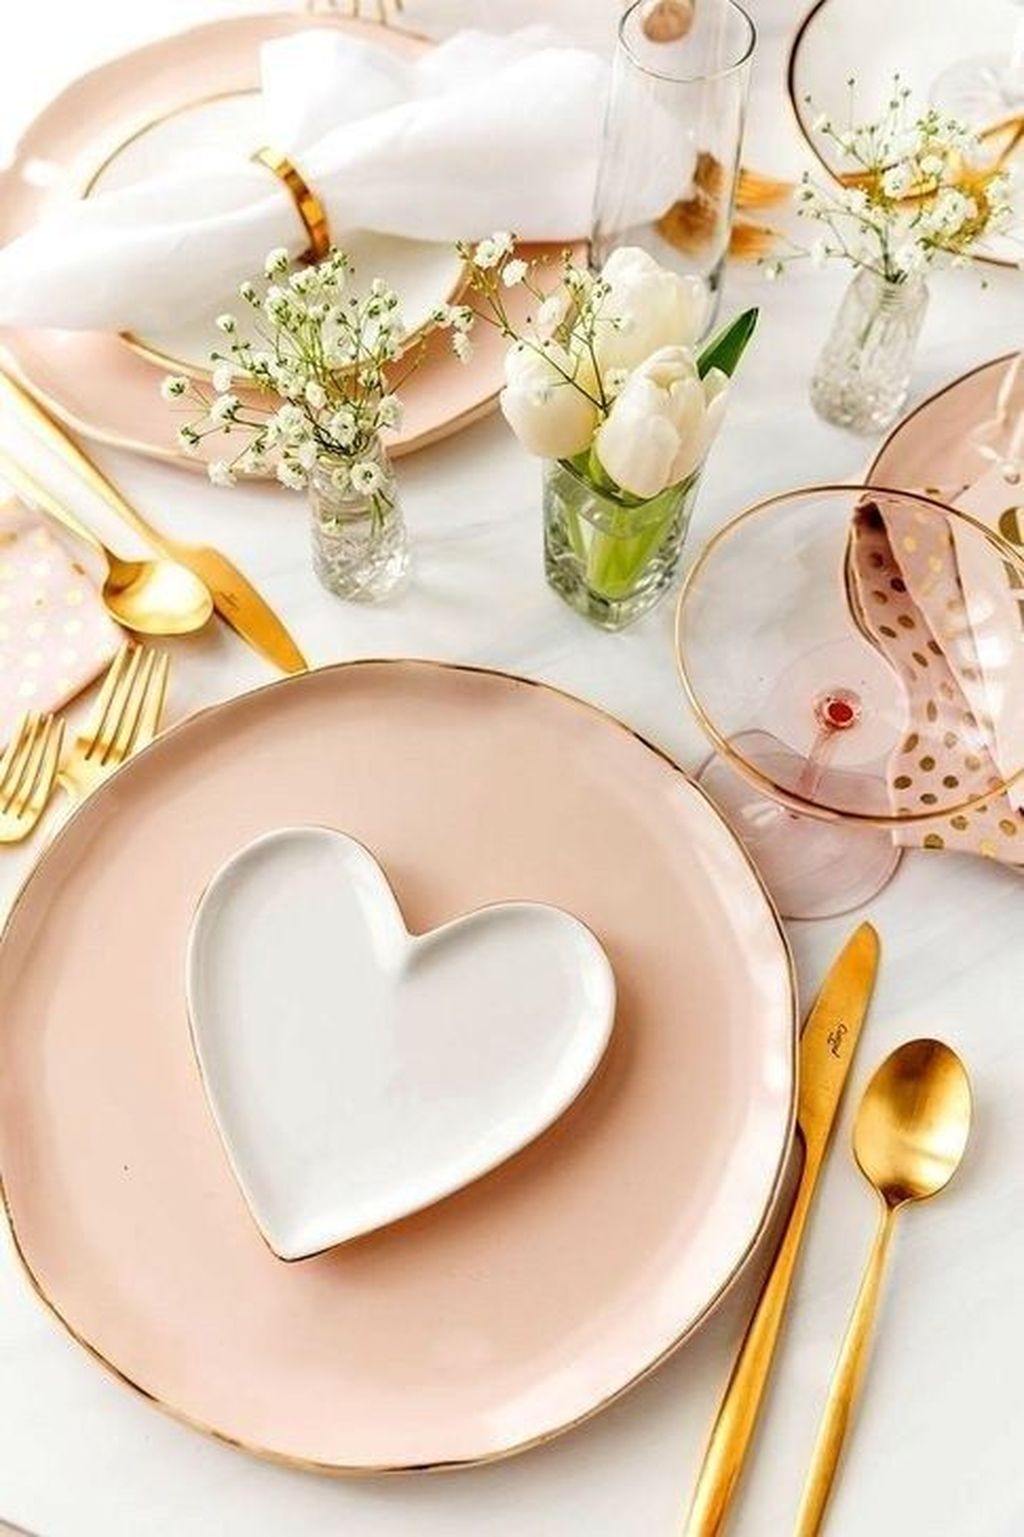 Perfect Valentine’s Day Romantic Dining Table Decor Ideas For Two People 01